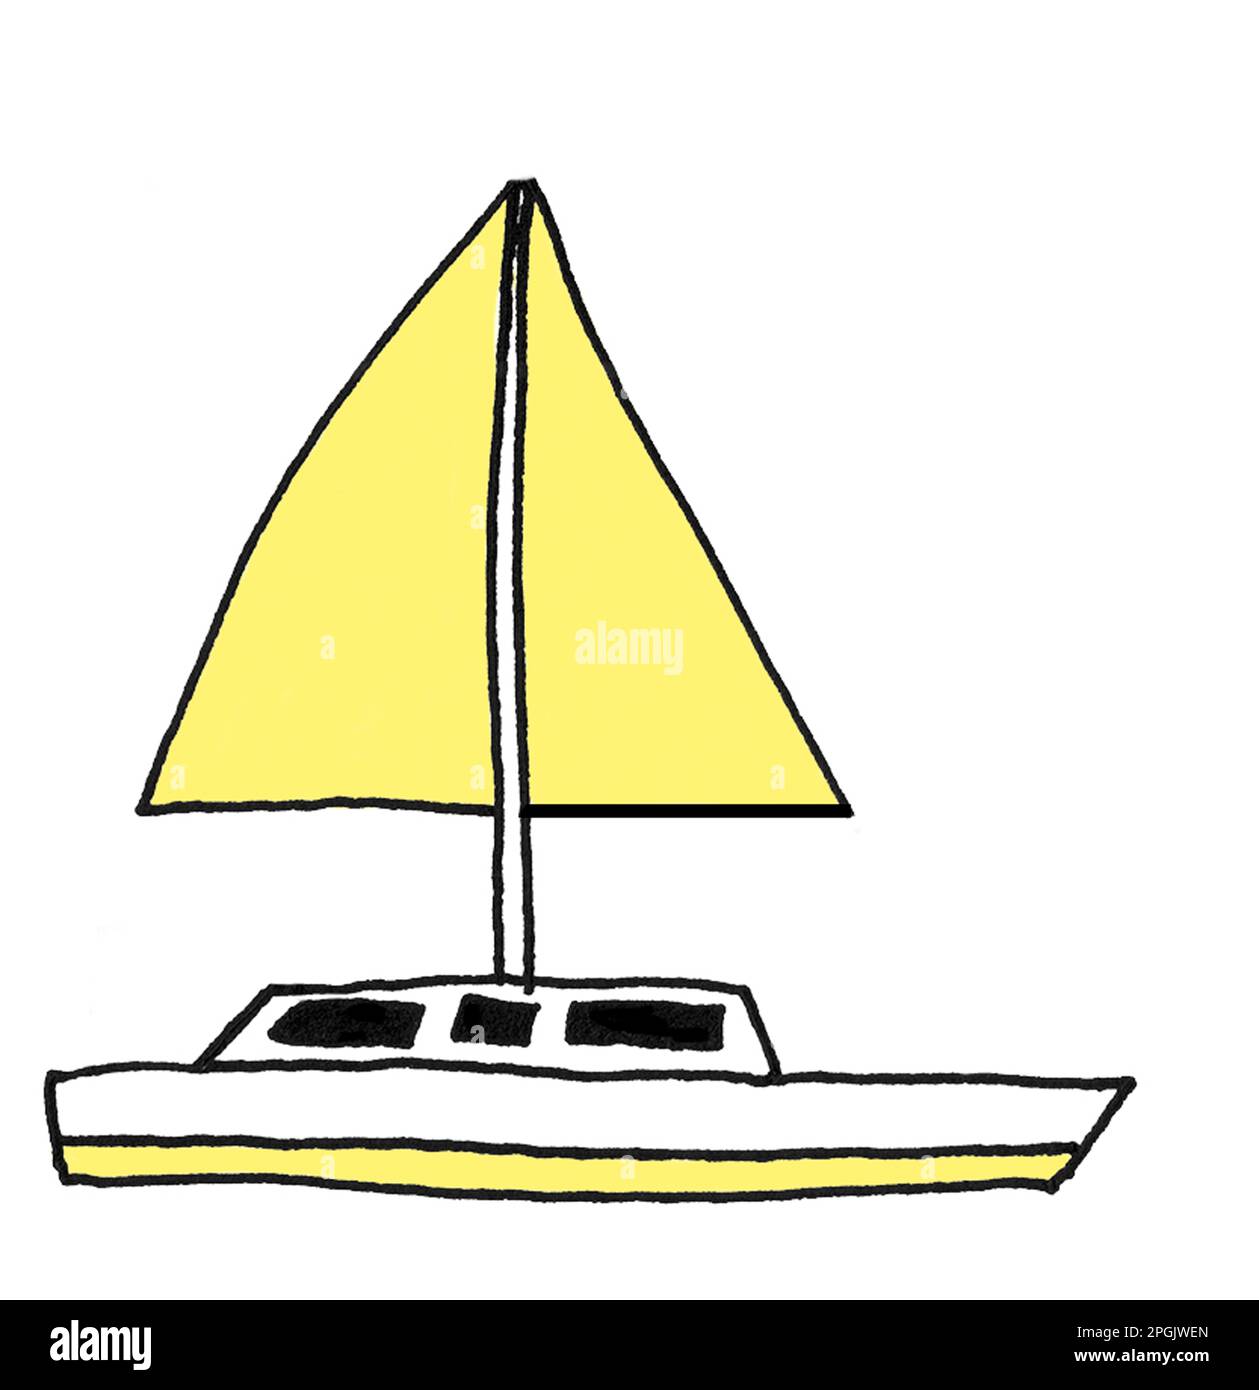 Illustration of a yellow boat Stock Photo